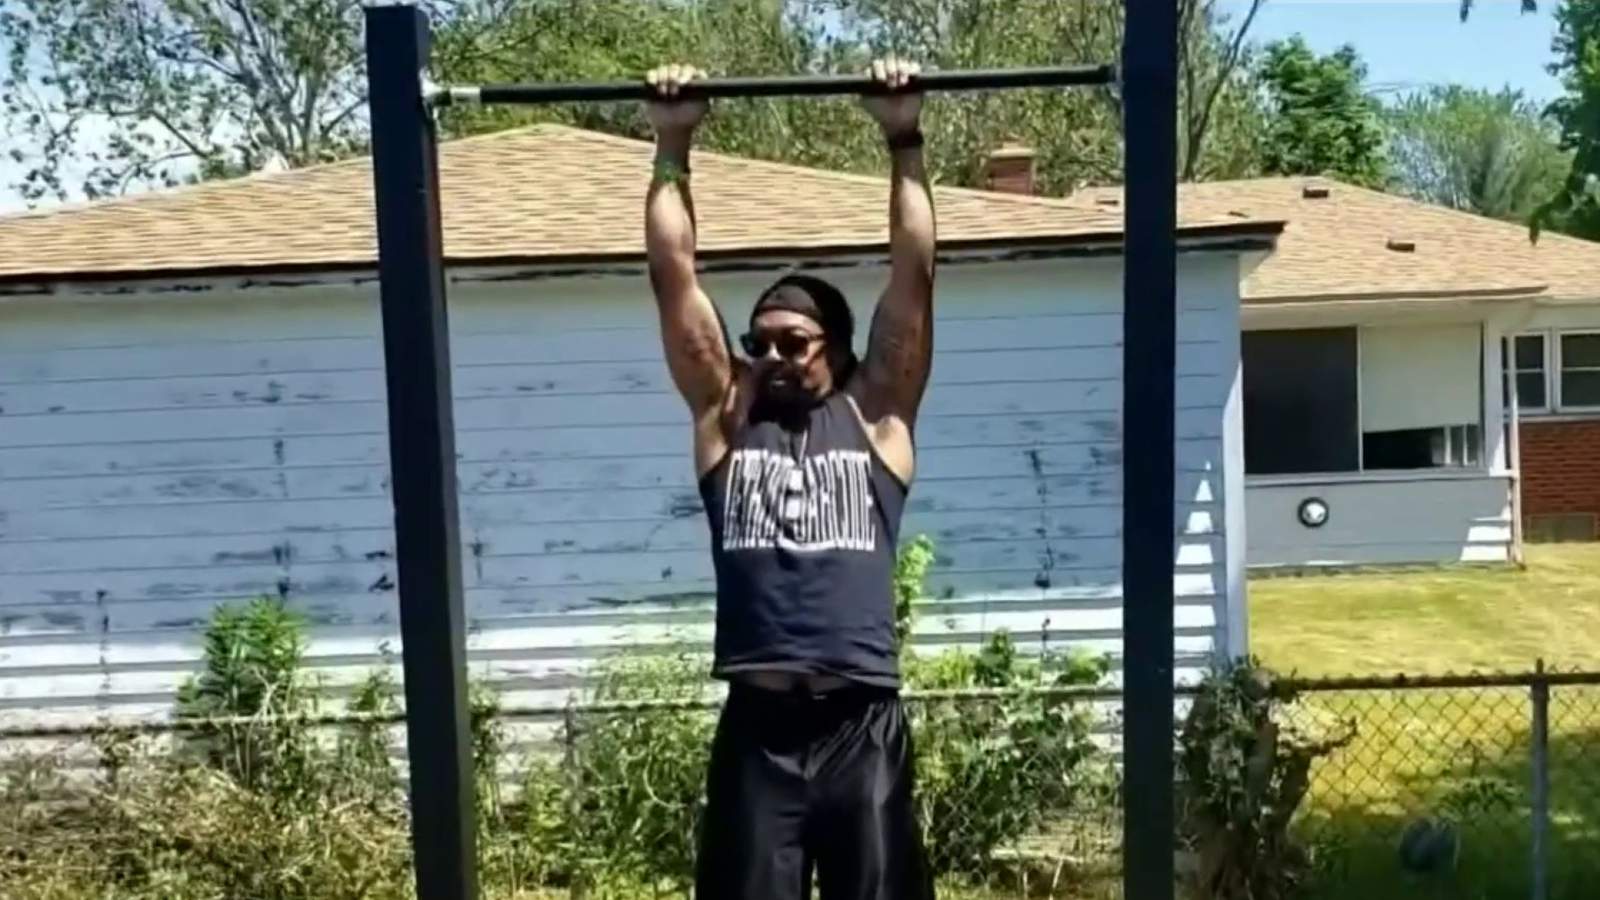 This Detroiter is raising money by building backyard gyms!